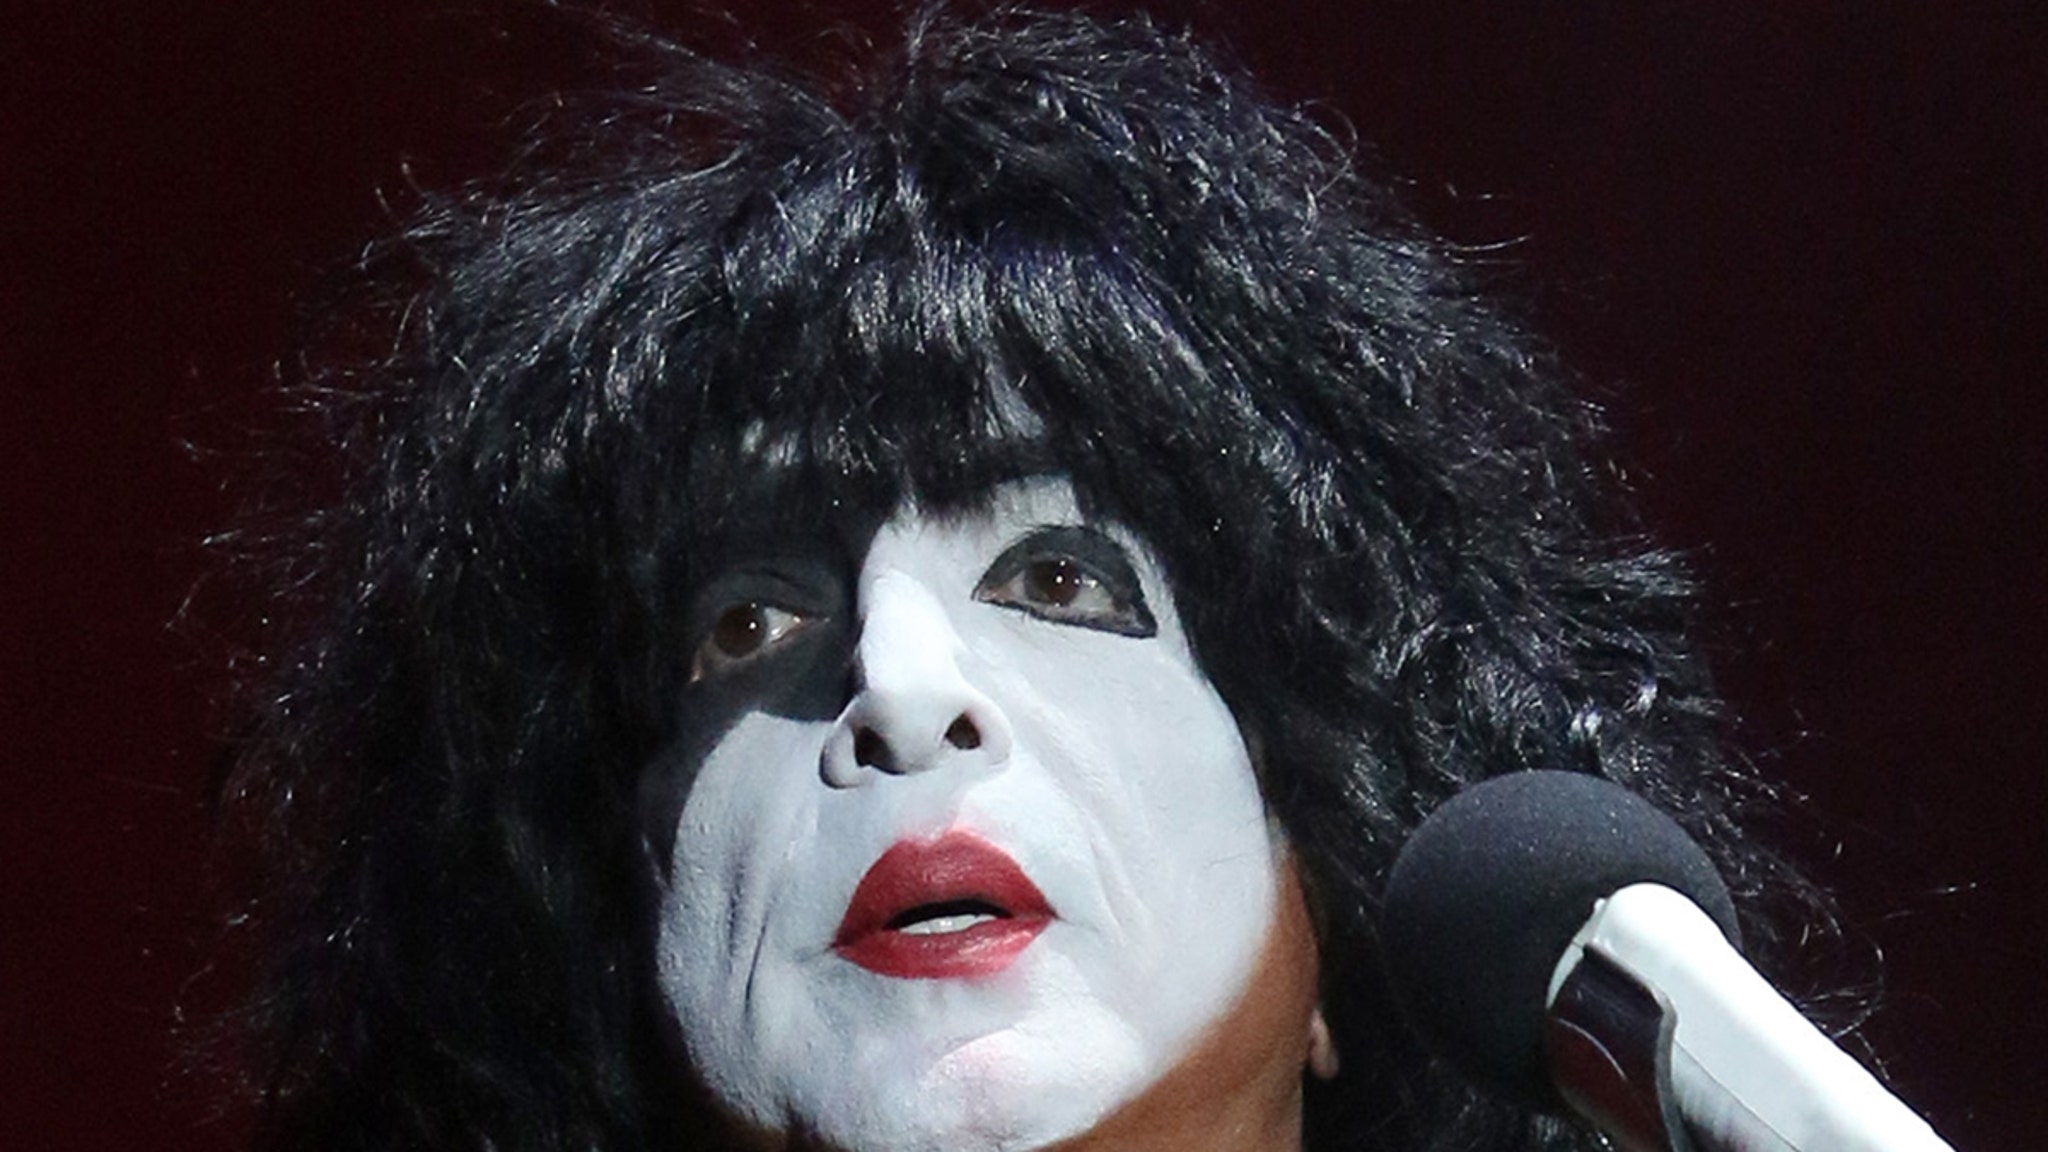 KISS Concert Canceled After Paul Stanley Tests Positive For COVID-19